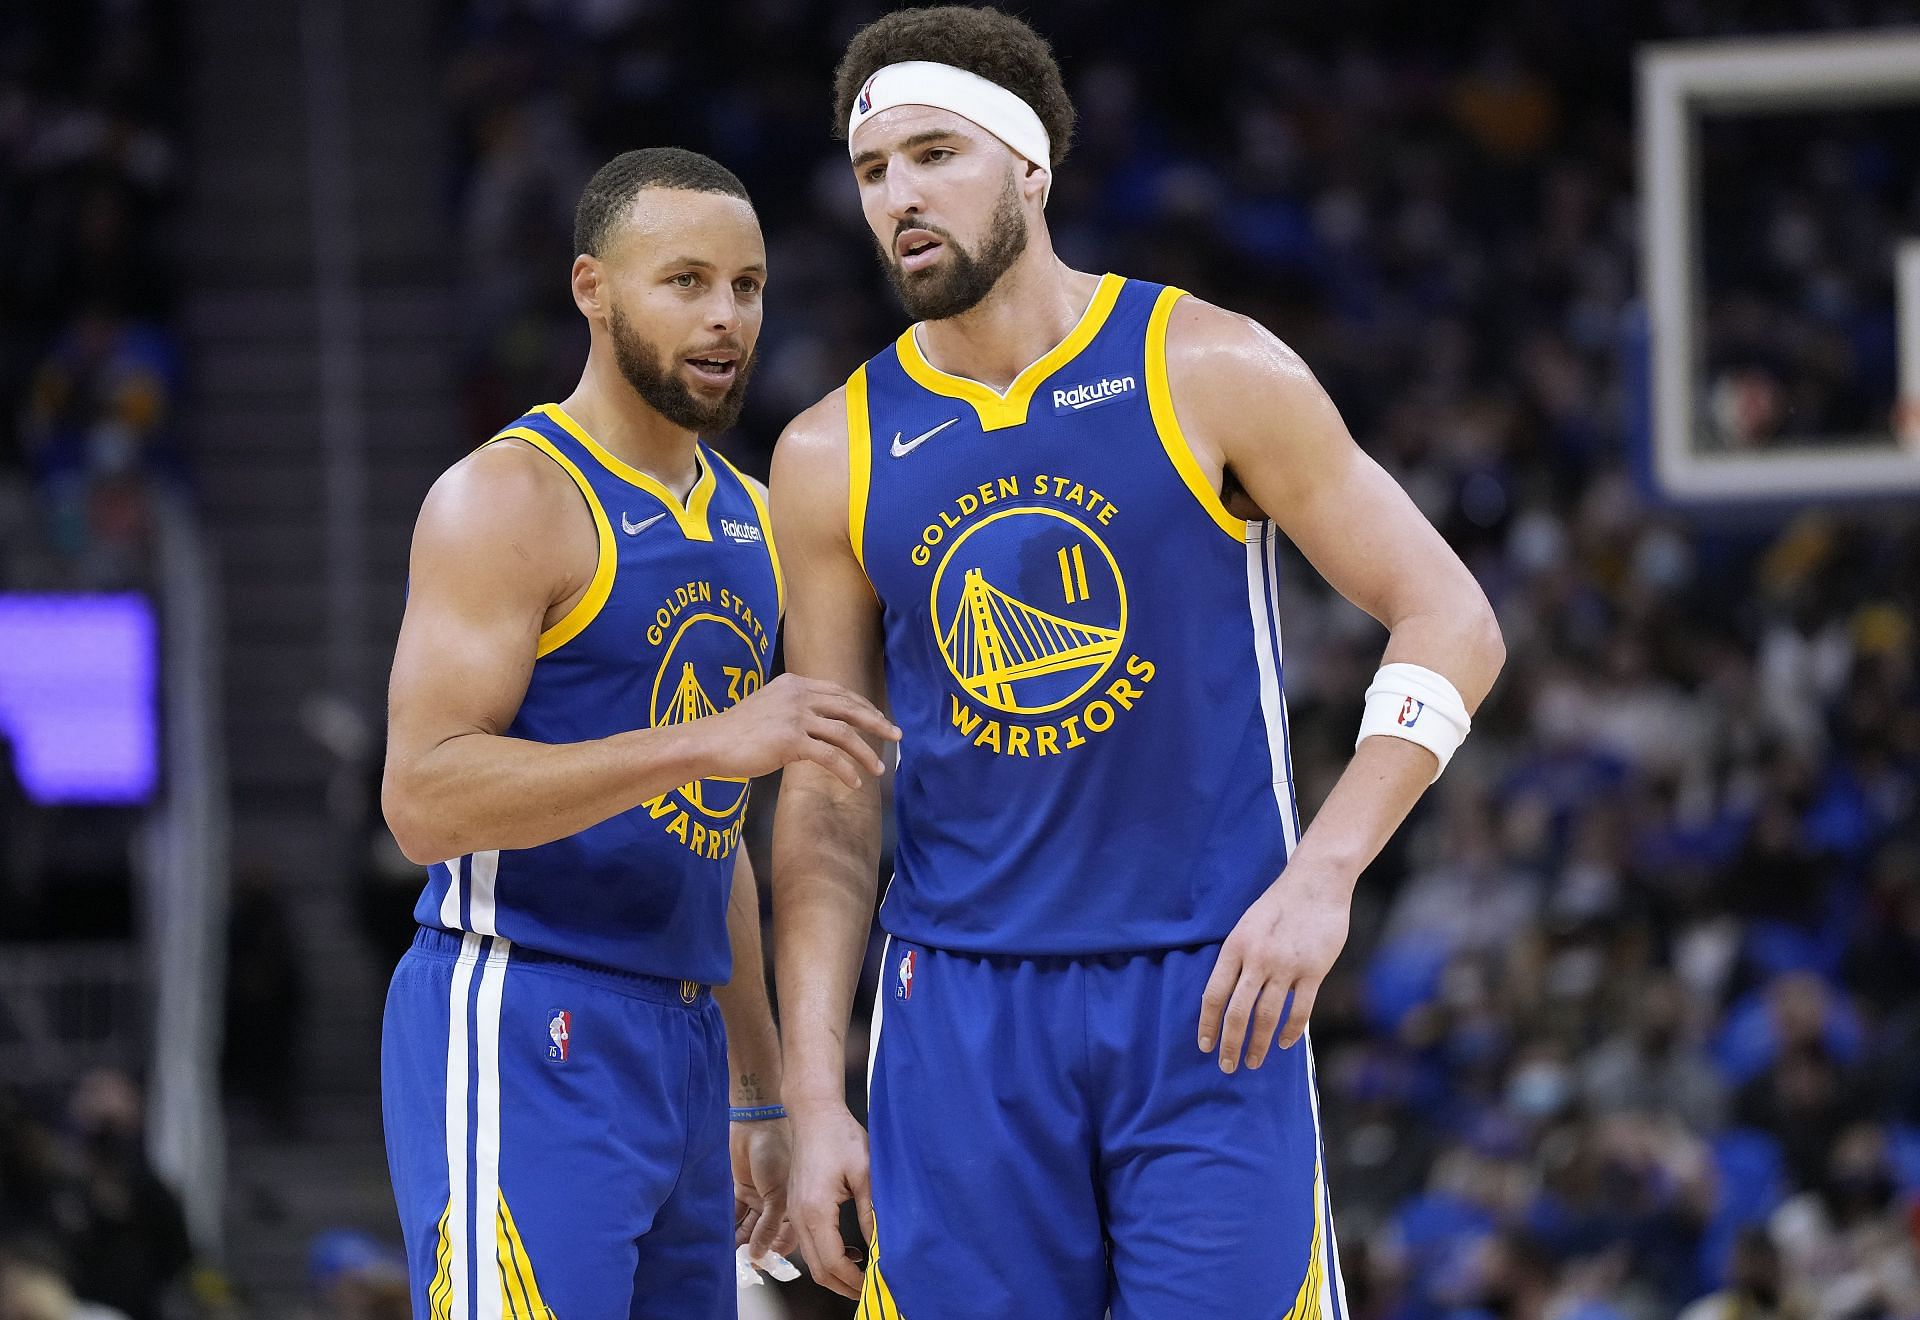 Steph Curry and Klay Thompson of the Golden State Warriors.